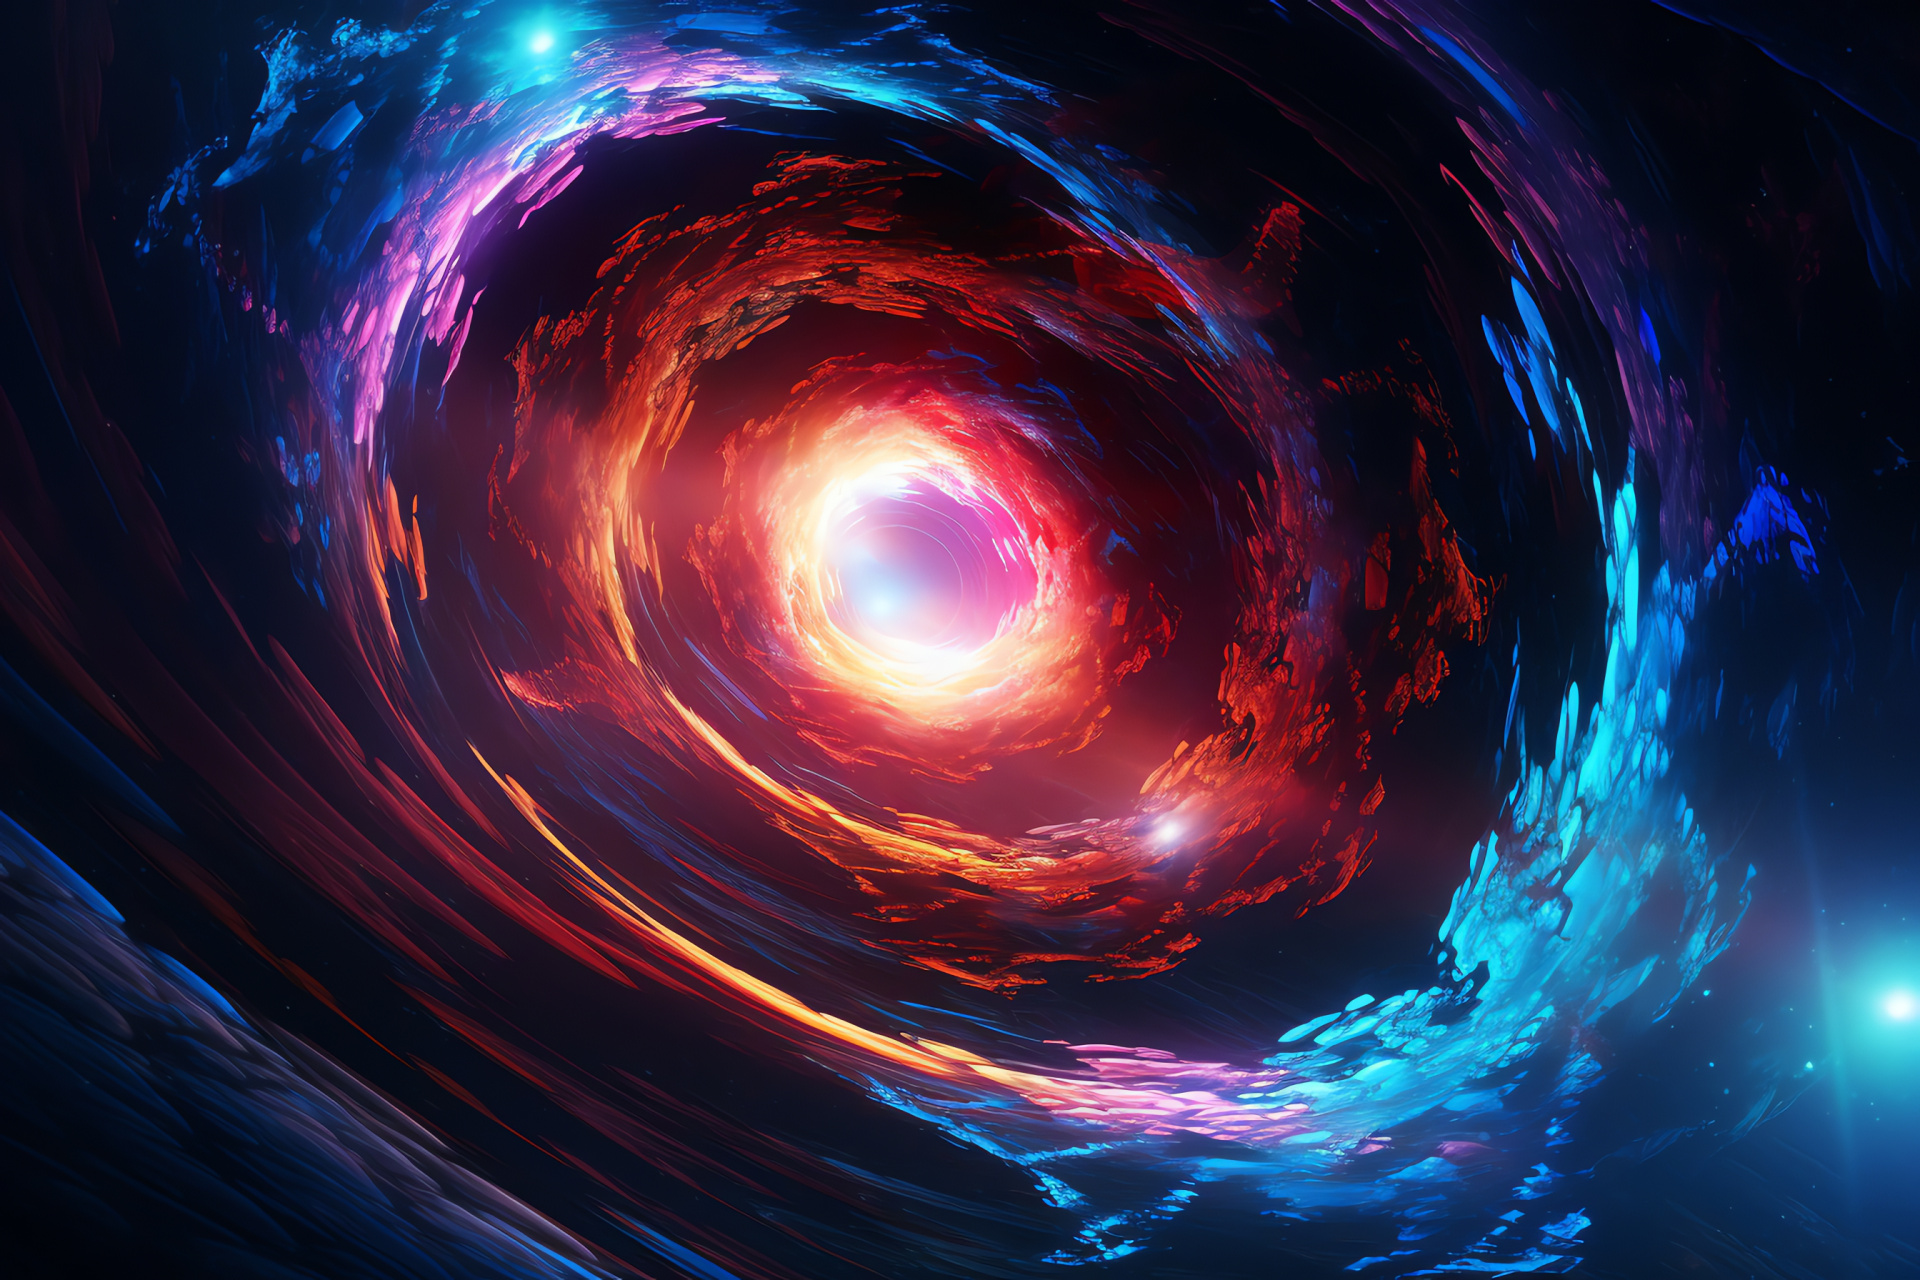 Futuristic wormhole, Swirling space passage, Force of gravity, Space-time distortion, Wormhole theory visualization, HD Desktop Image